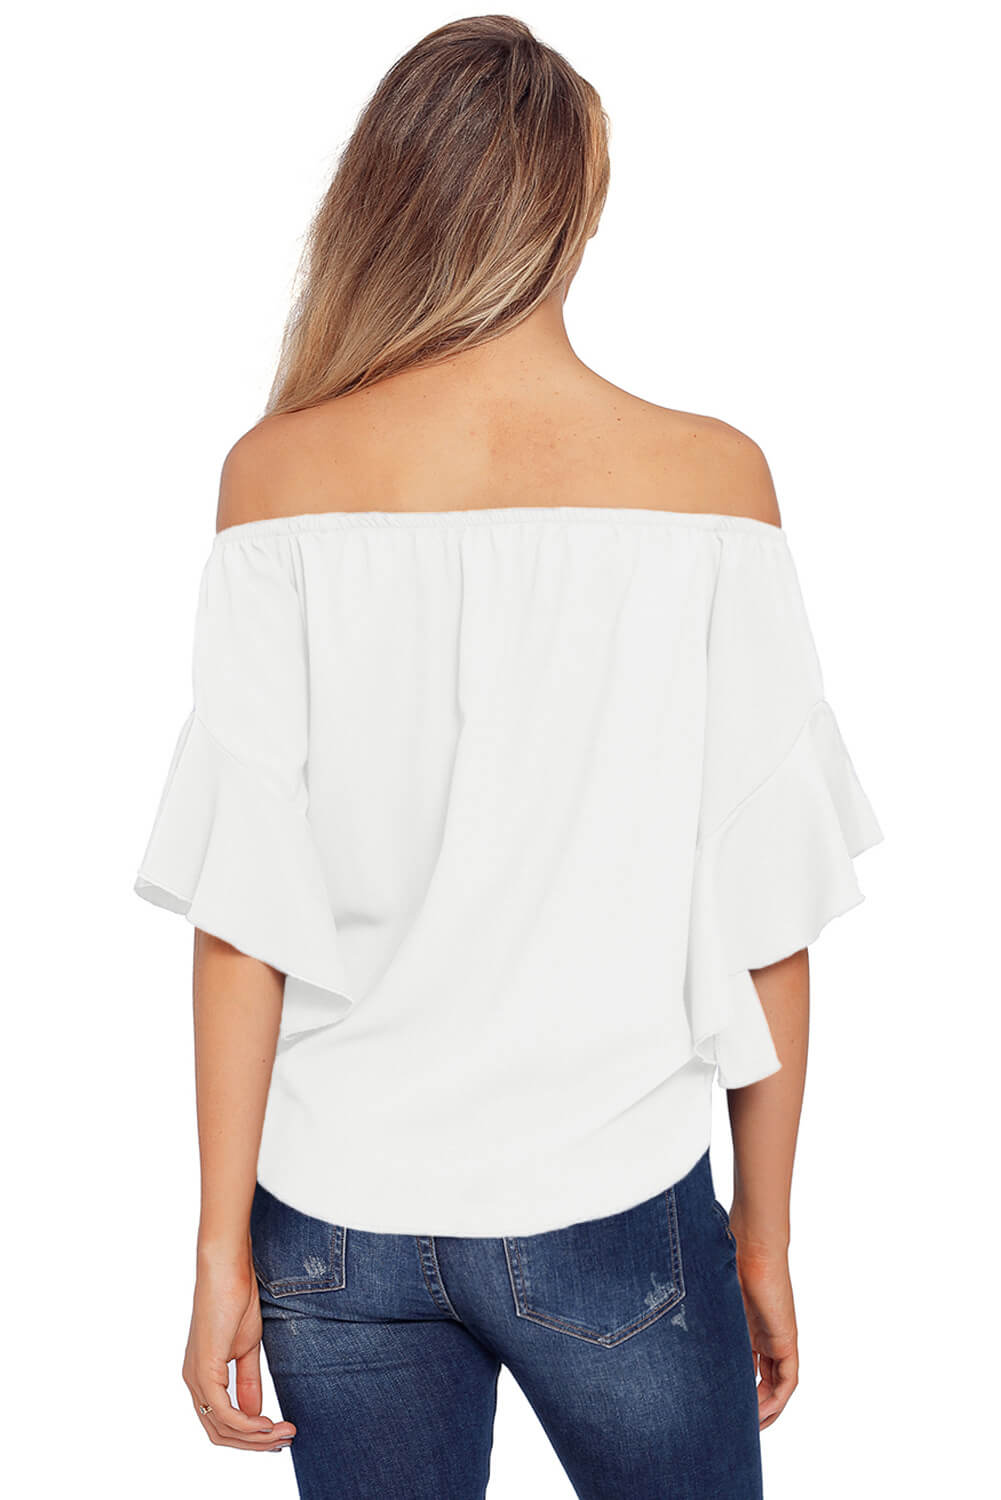 19.99 - Asvivid Womens Solid Off the Shoulder Tops 3 4 Flare 